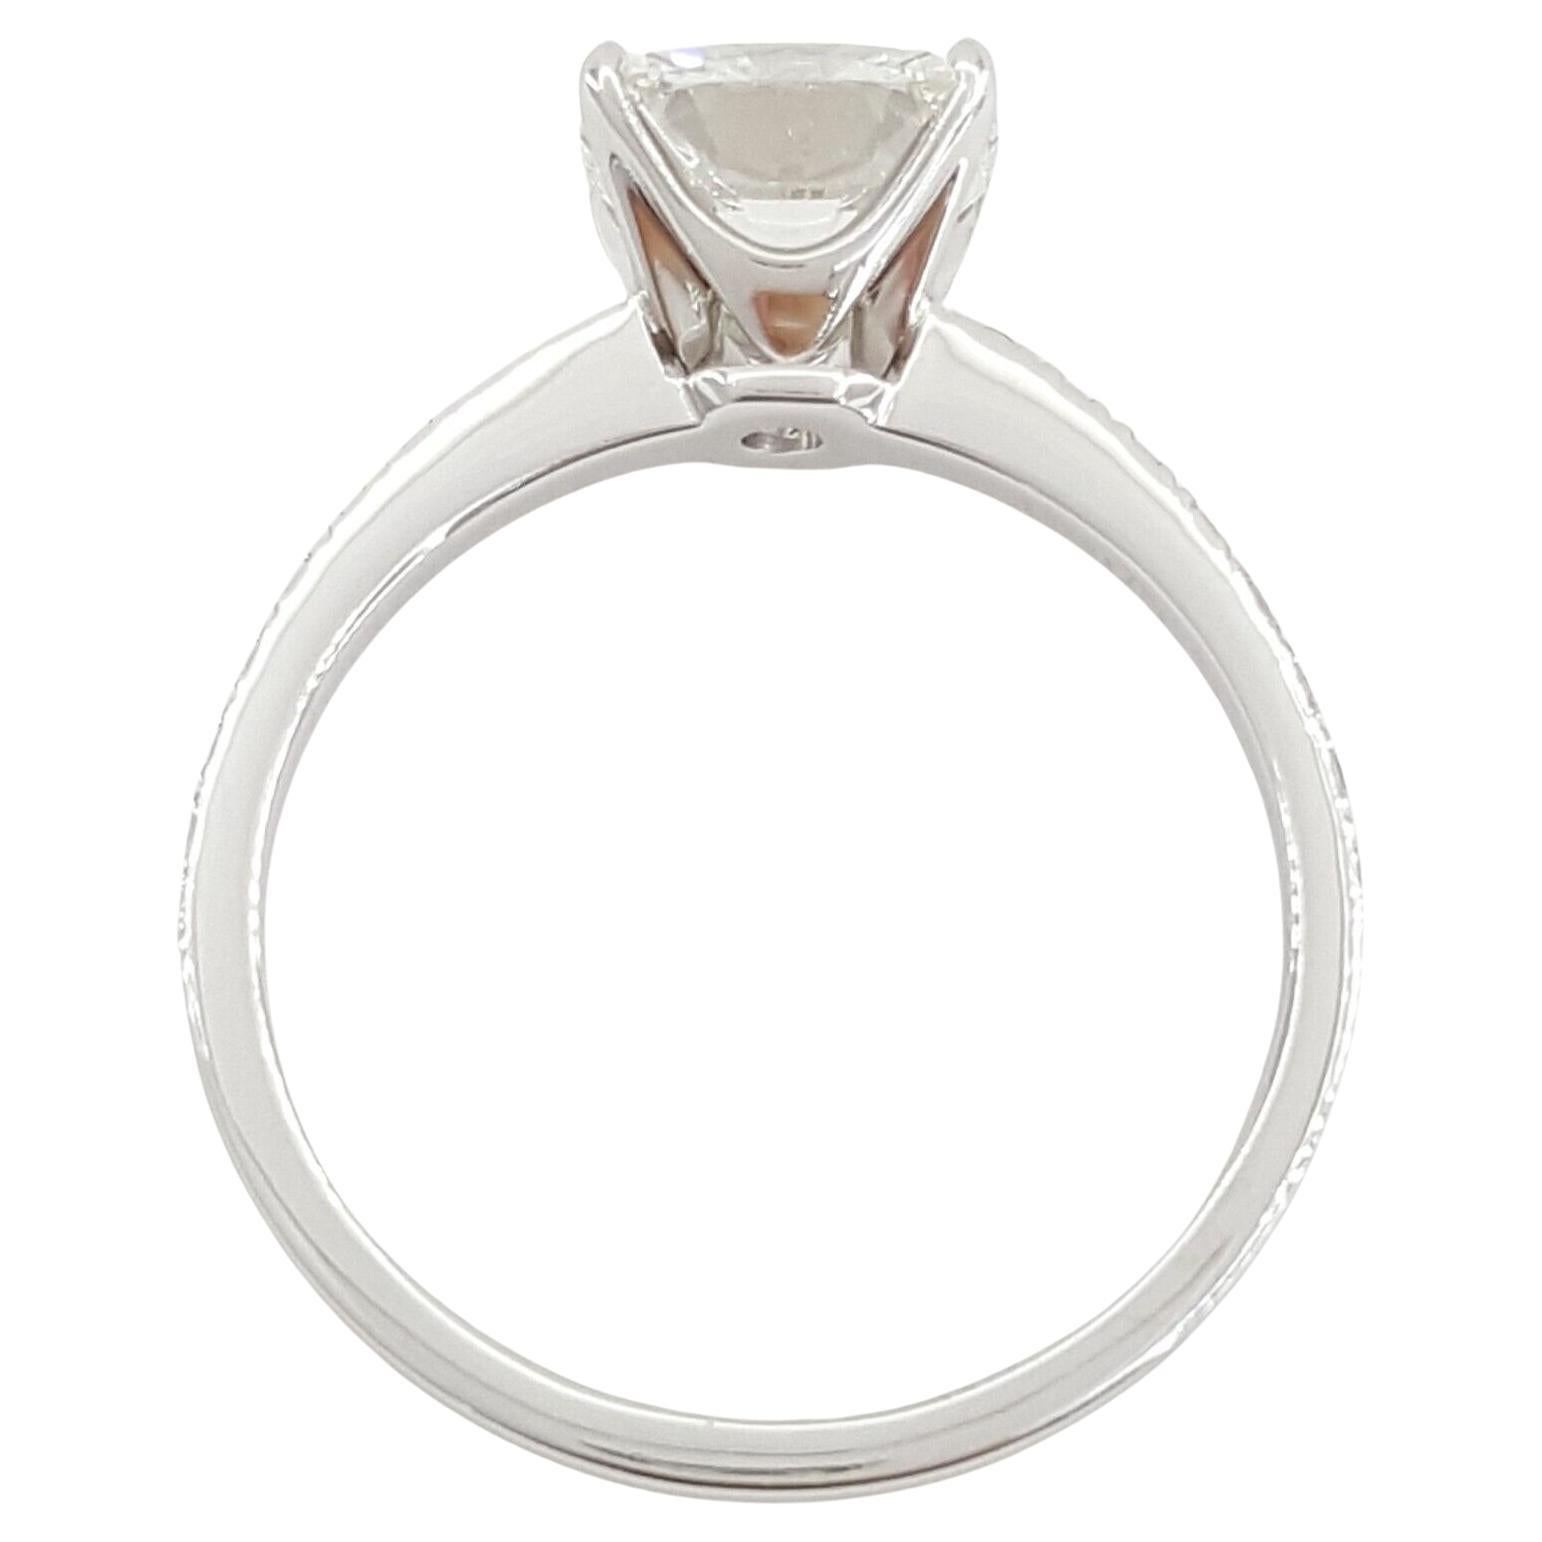 This exquisite Tiffany & Co. NOVO Platinum Cushion Brilliant Cut Diamond Engagement Ring is a true masterpiece. Here are the stunning details:

The ring is crafted in platinum and weighs 4.5 grams, with a ring size of 7.5.

The centerpiece of this